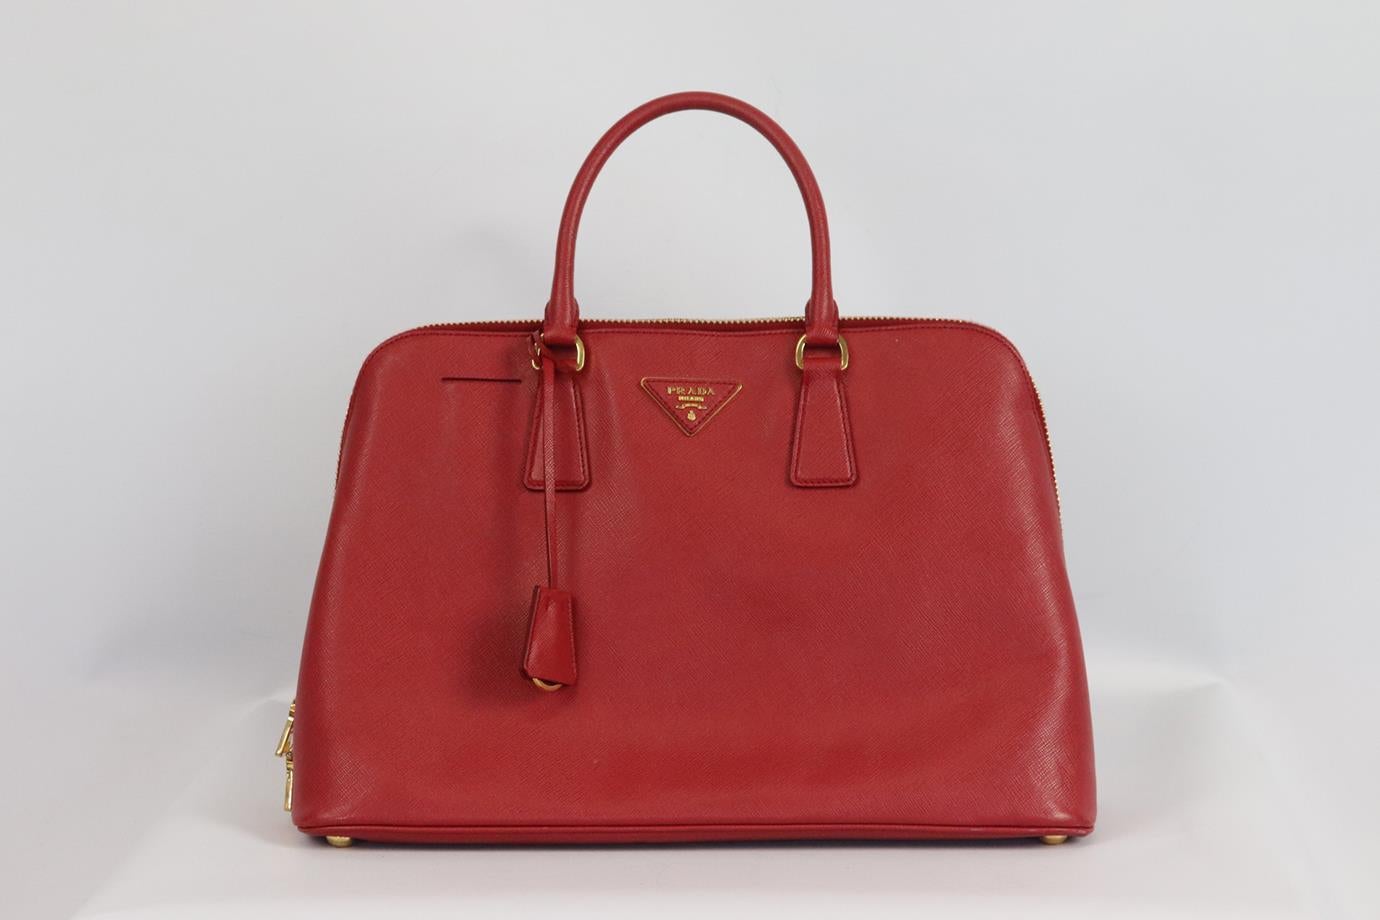 Red Prada Promenade Saffiano Large Textured Leather Tote Bag For Sale